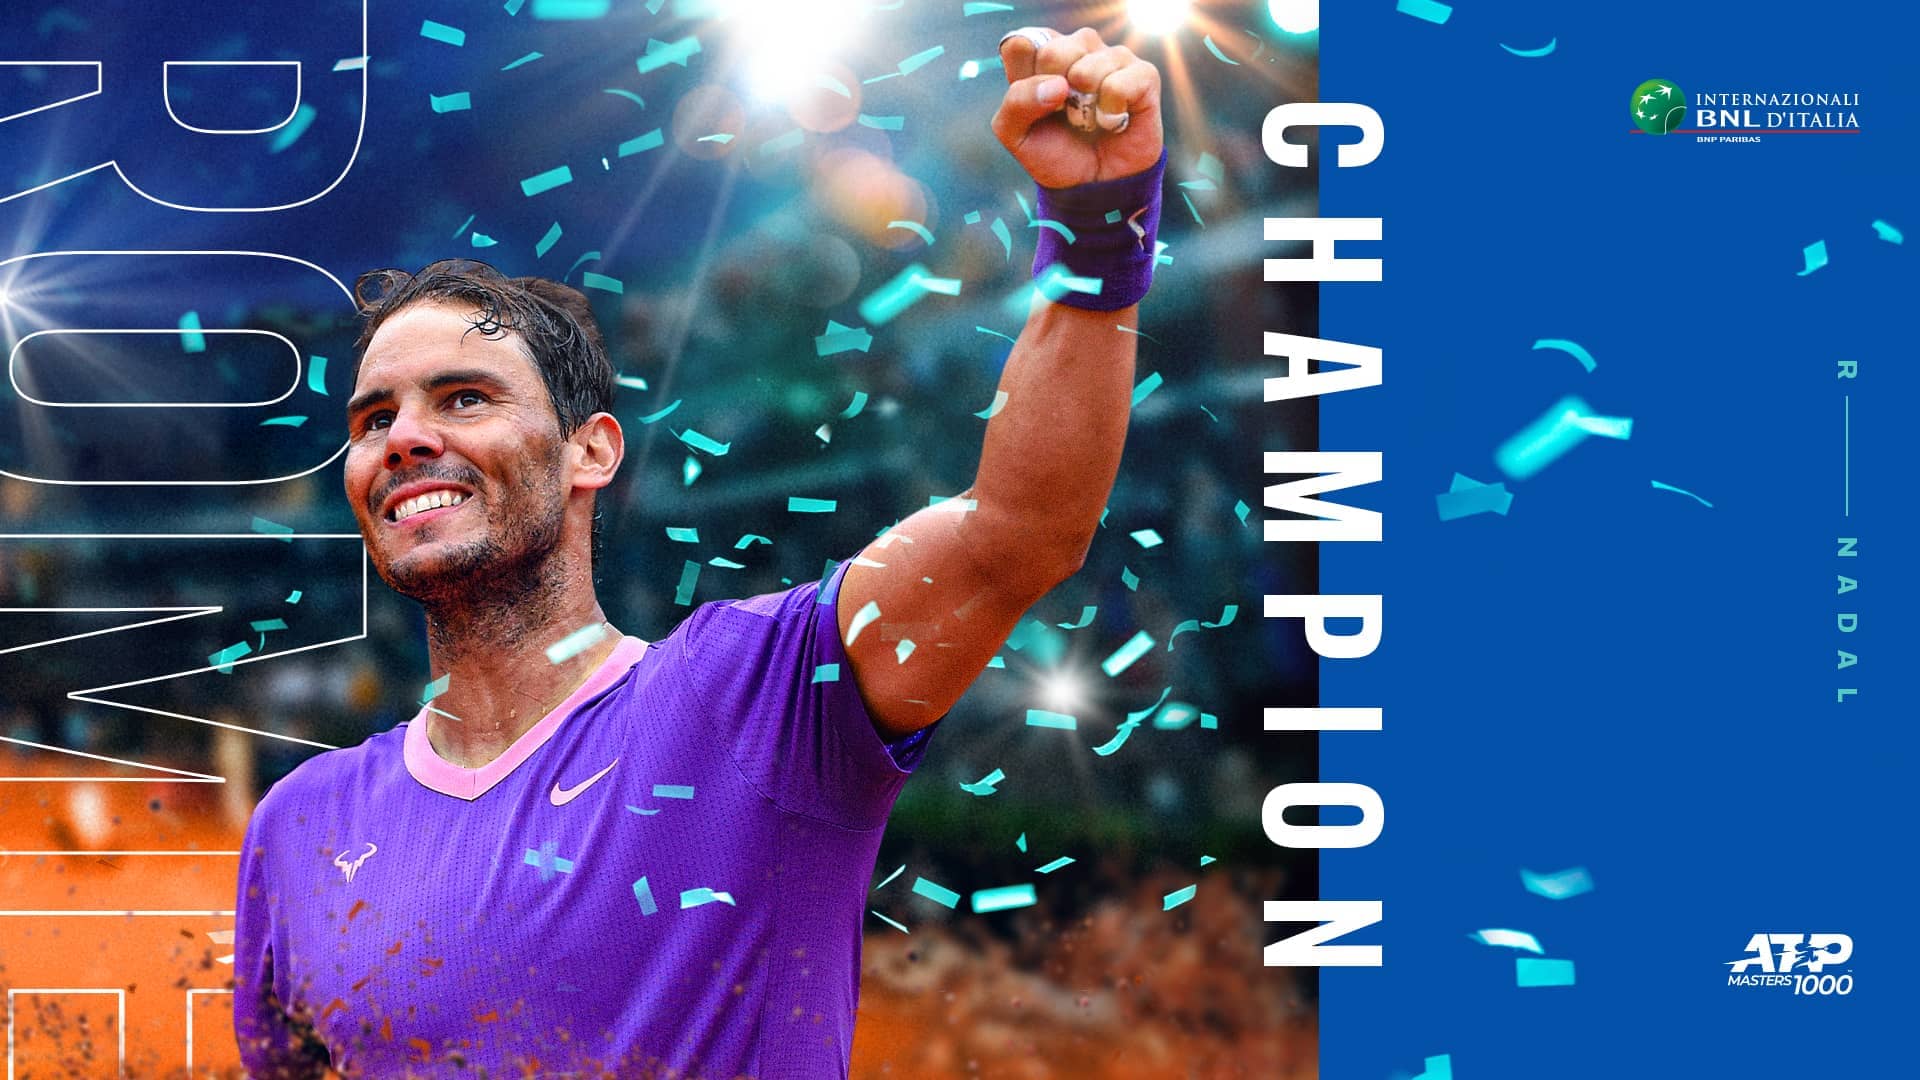 Rafael Nadal claims his 10th Internazionali BNL d'Italia title and a record-equalling 36th ATP Masters 1000 crown with a victory over Novak Djokovic.